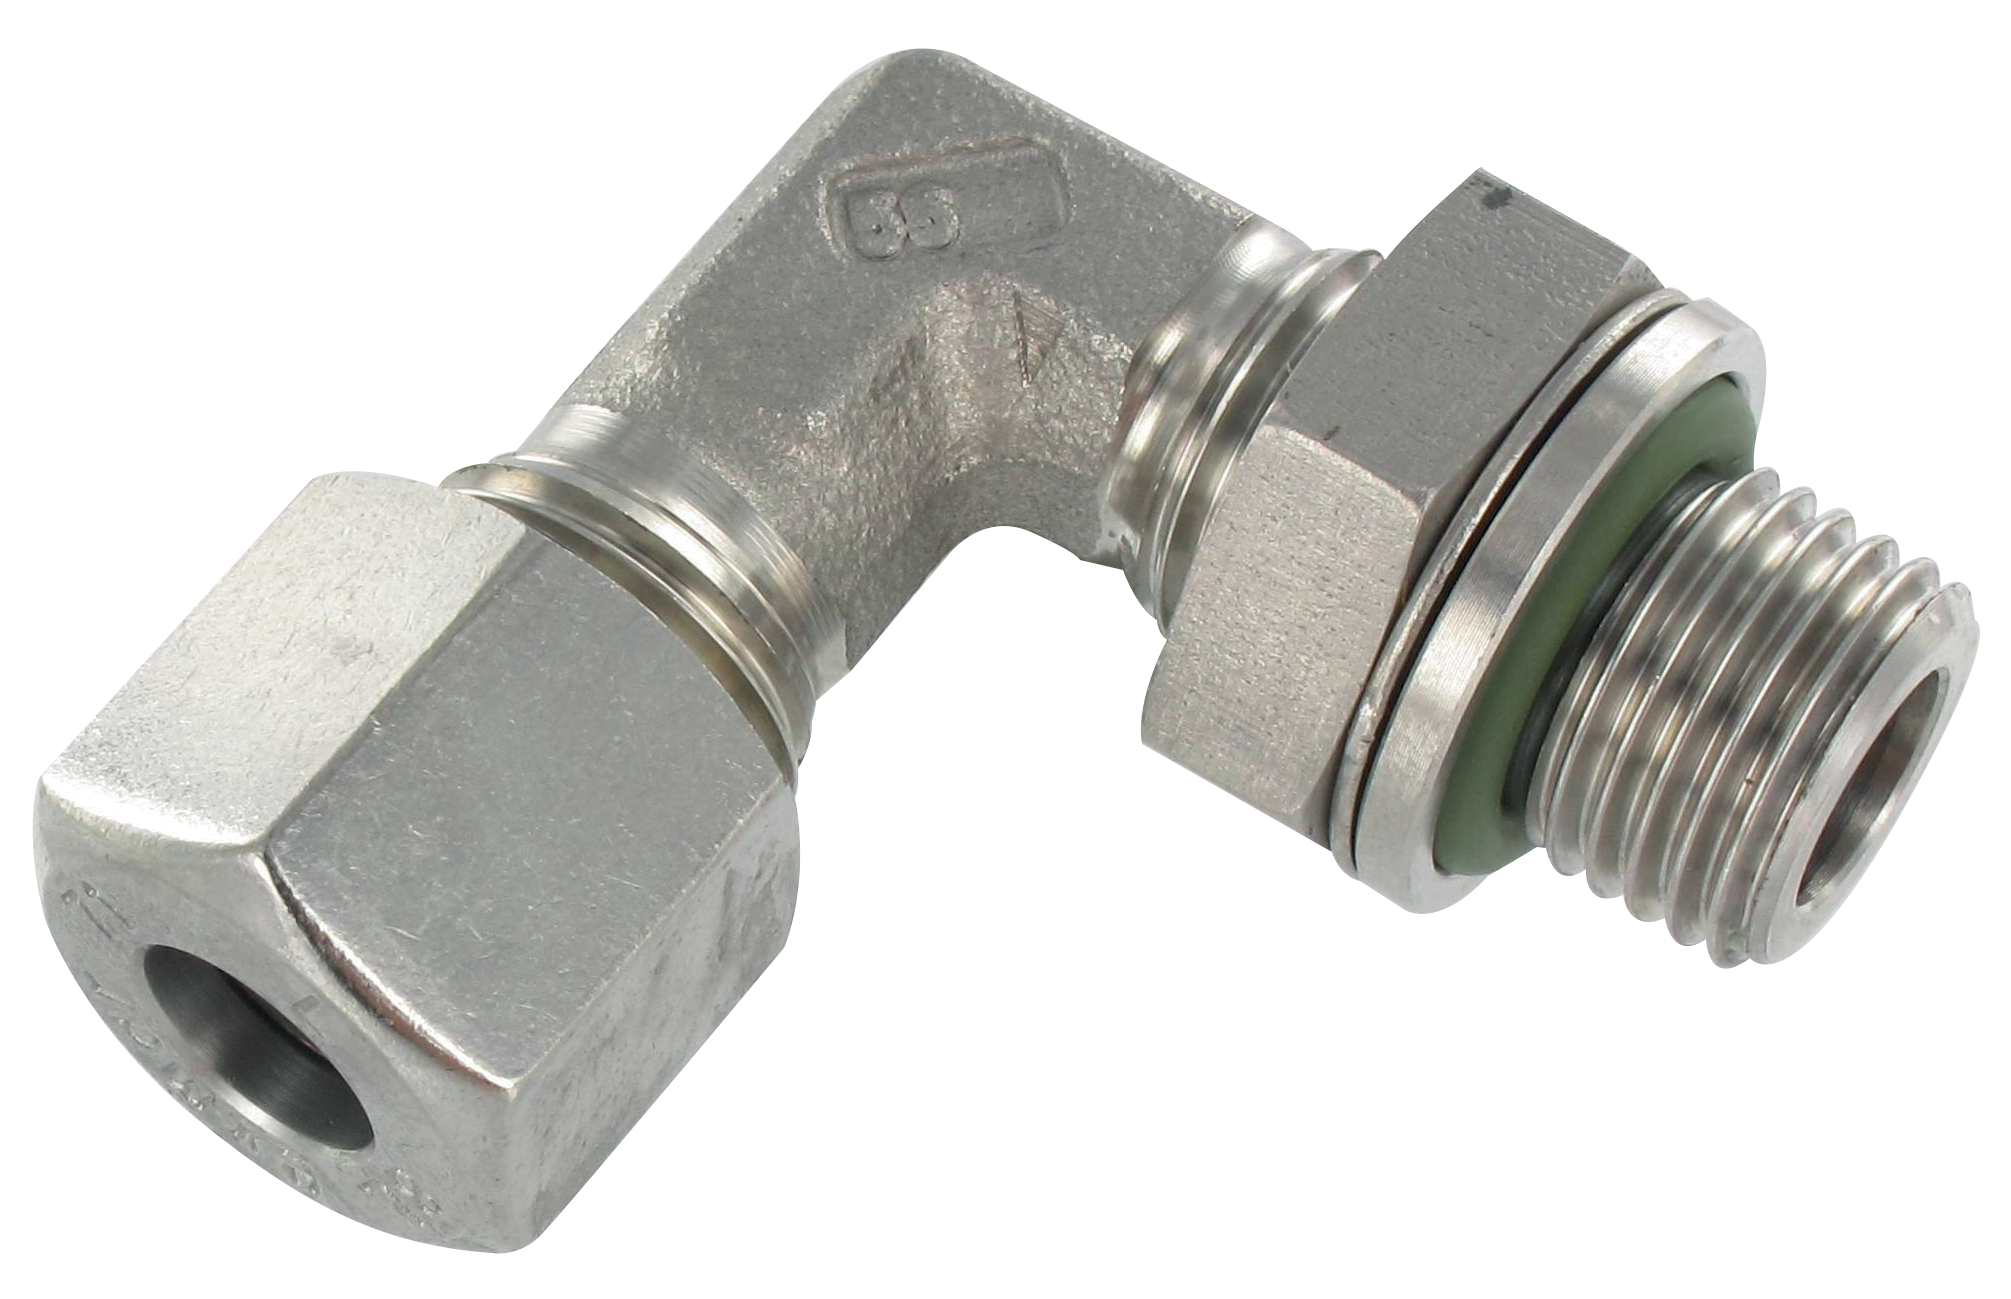 Universal compression fittings DIN standard in nickel plated brass